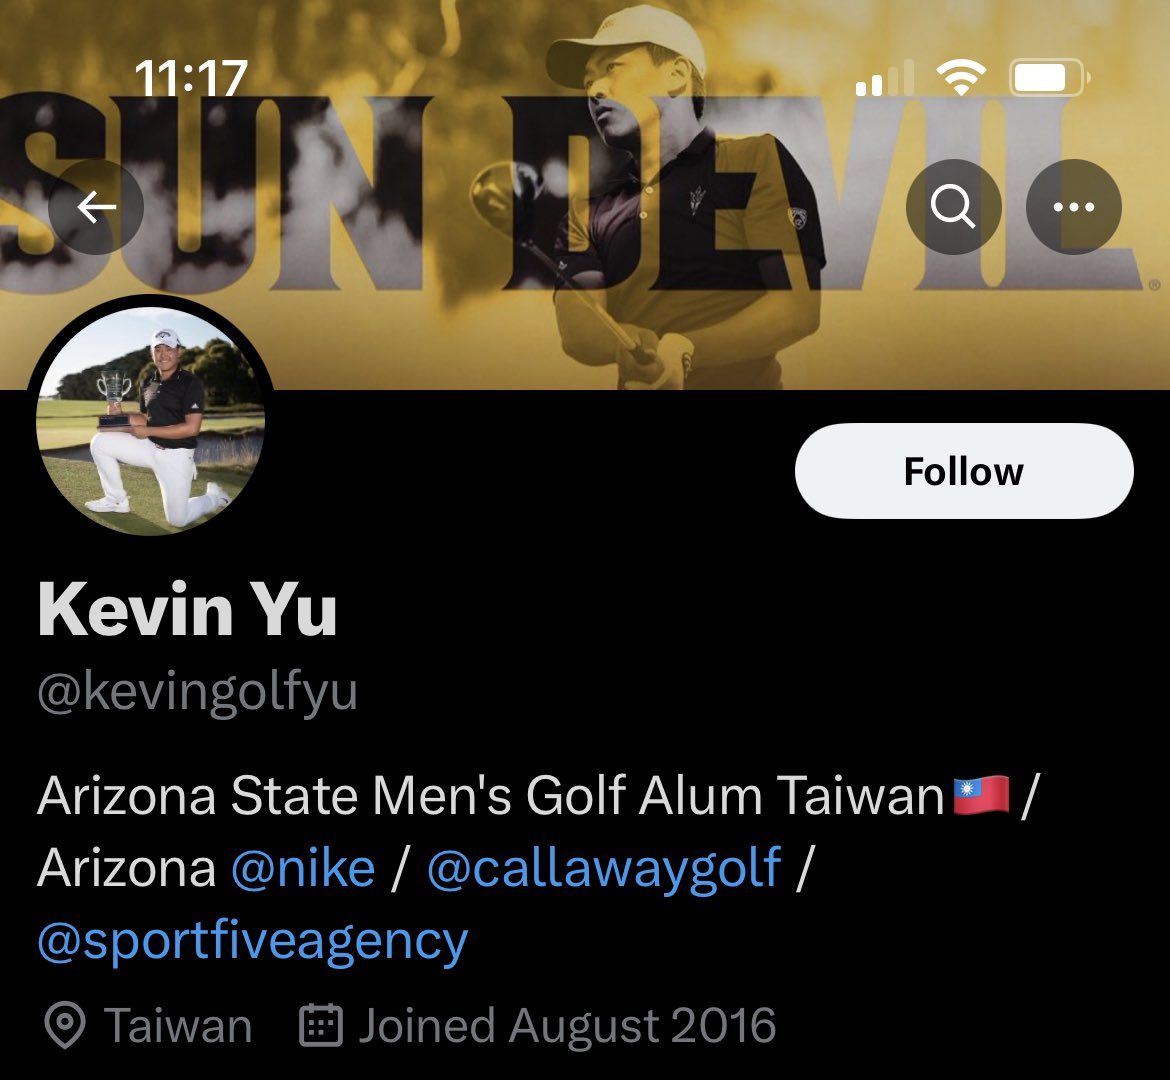 Hey @espn, why doesn’t Taiwanese golfer Kevin Yu get the flag of Taiwan next to his name, but Mcllroy gets Northern Ireland’s next to his? The Chinese Taipei flag is just for the Olympics. This is shameful and blatant disrespect to Yu. @PGATOUR players should be outraged.